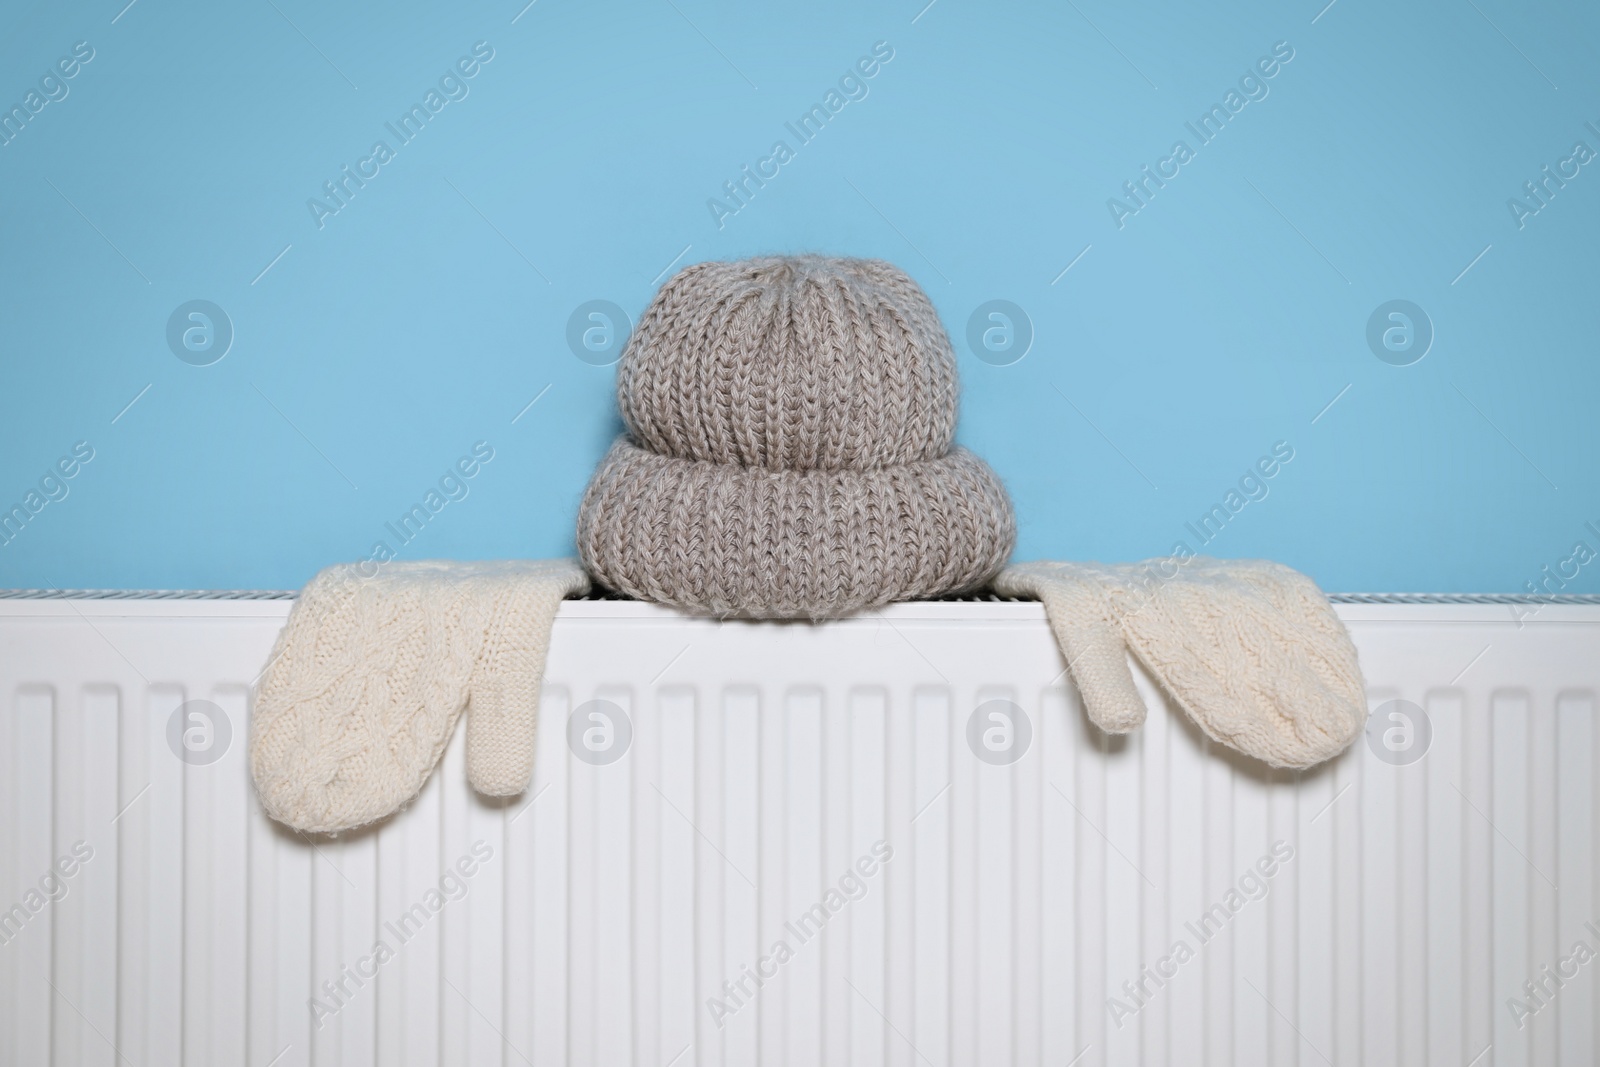 Photo of Modern radiator with knitted hat and mittens near light blue wall indoors